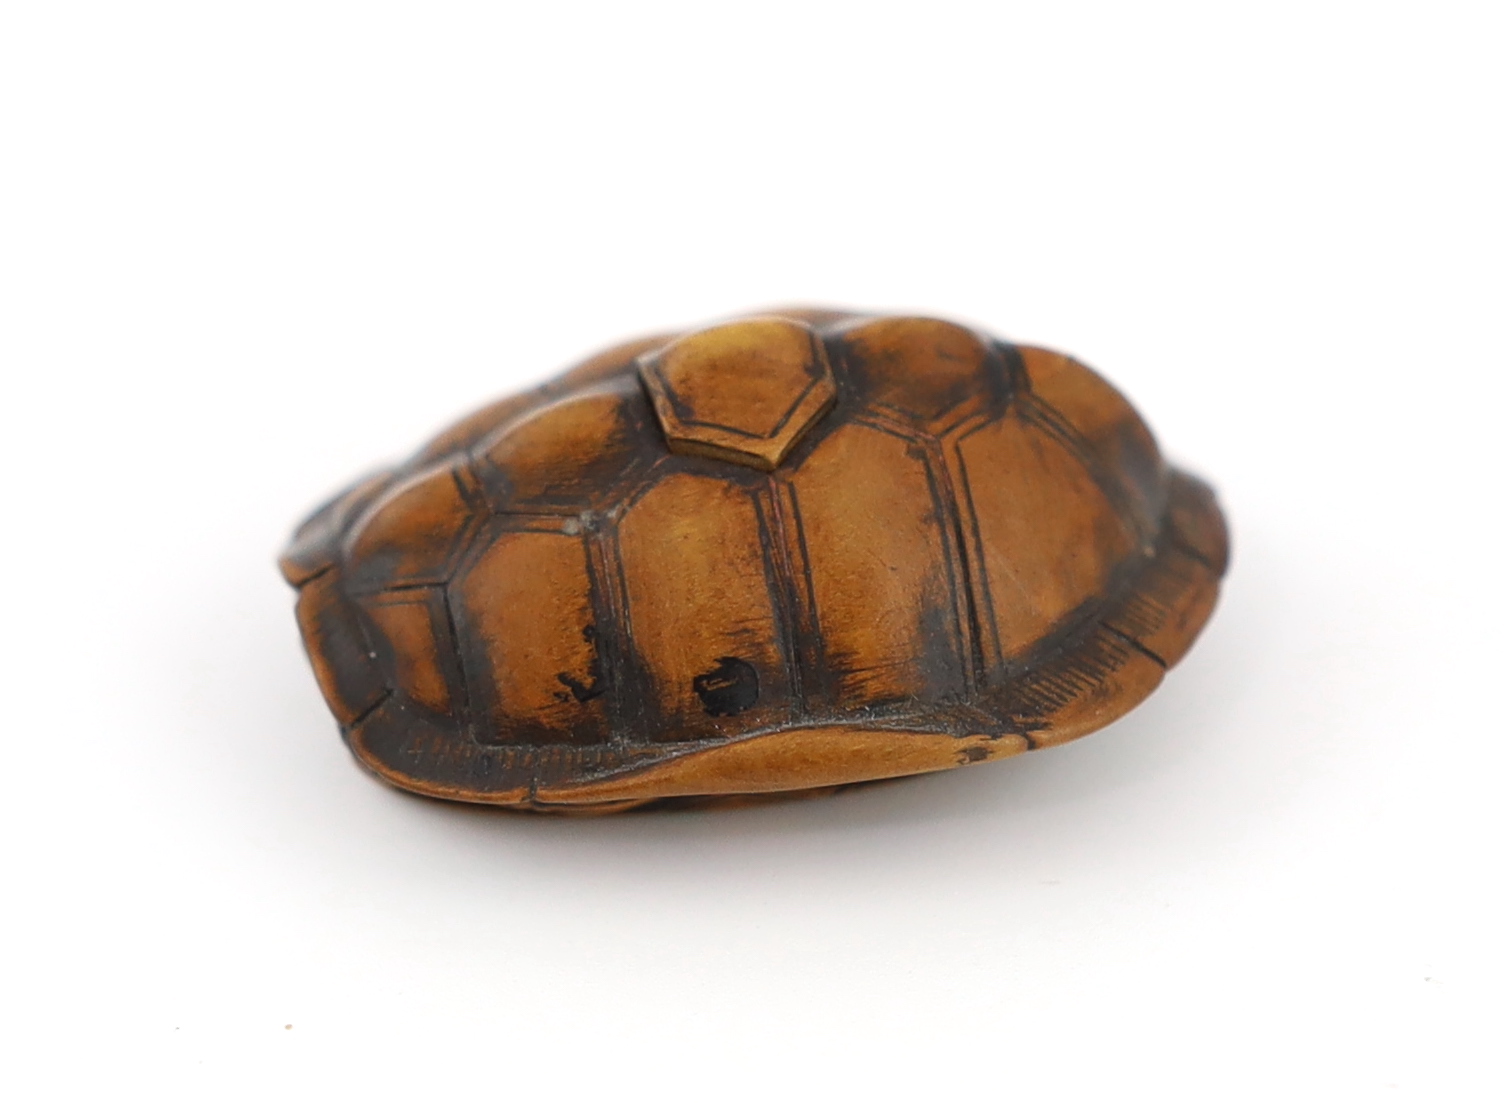 A Japanese carved wood netsuke of a turtle shell, mid 19th century